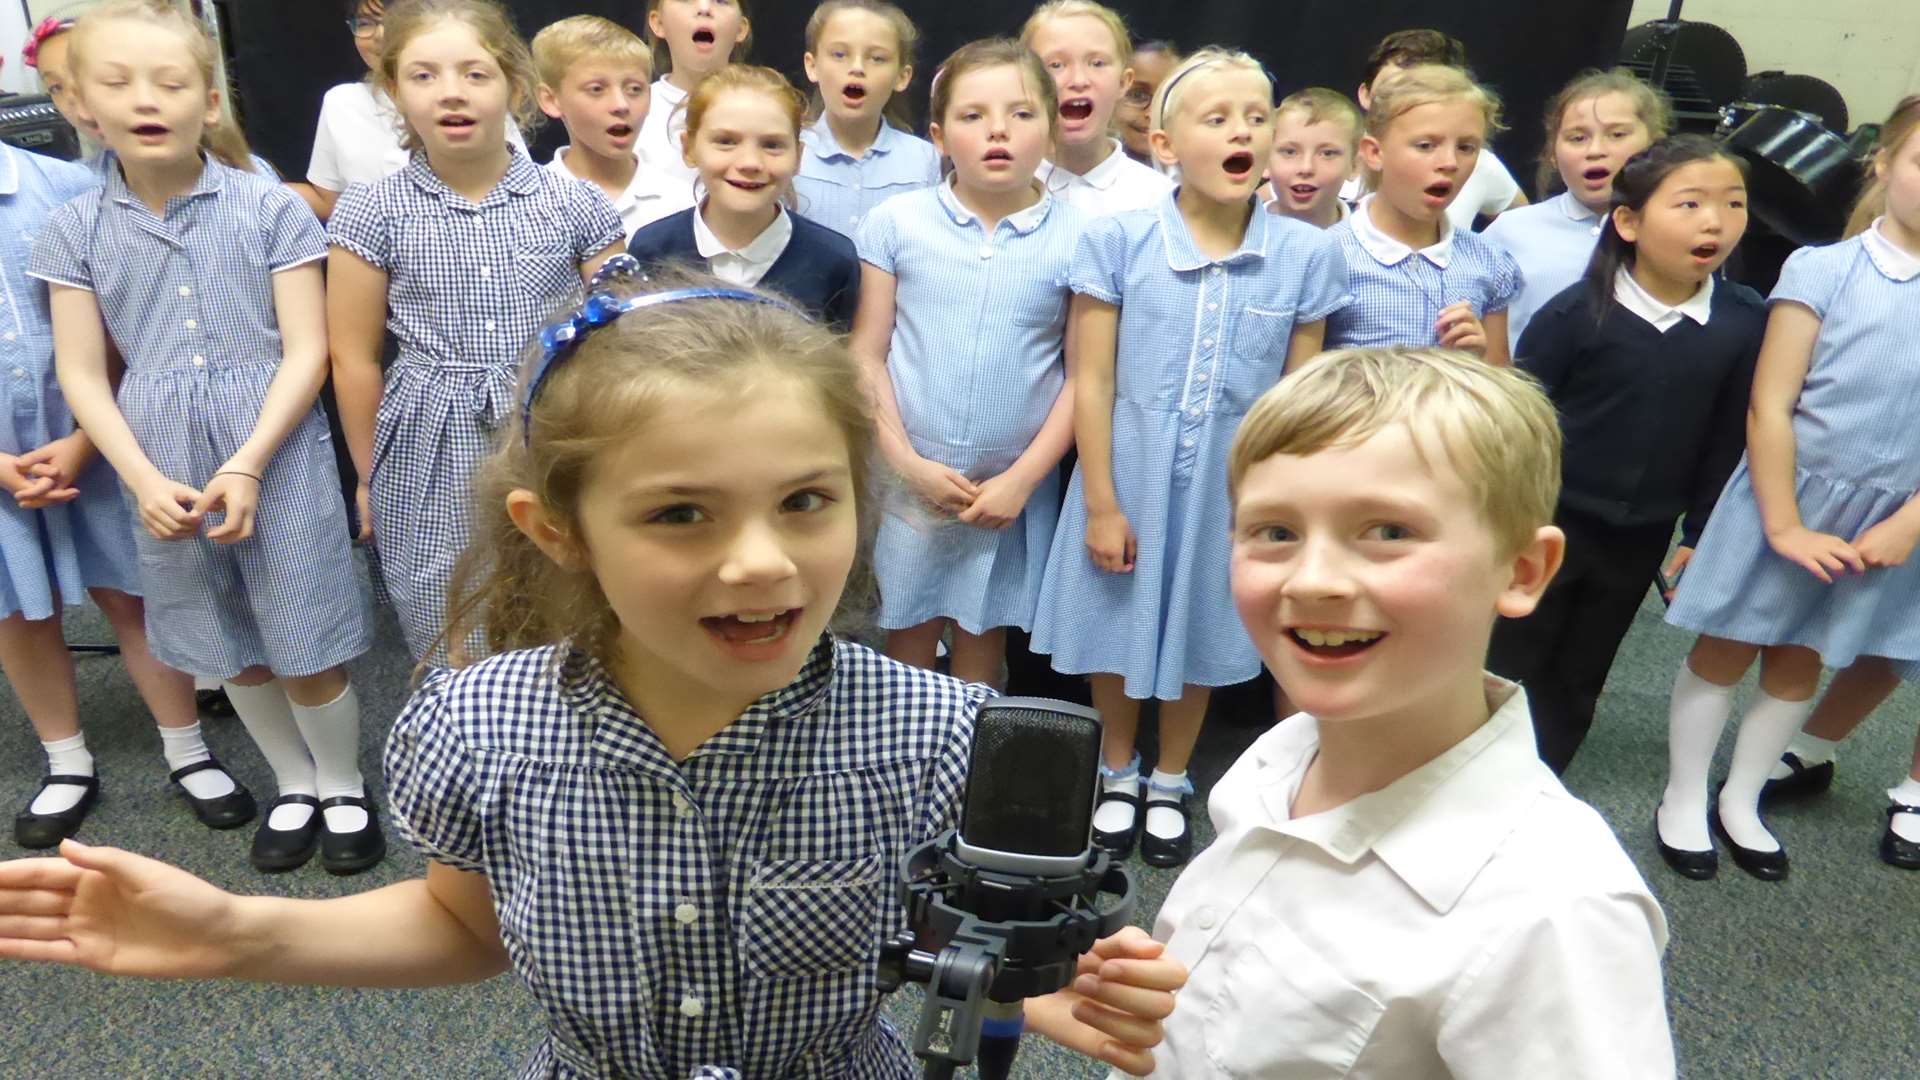 Pupils of the Wincheap Primary School choir who were crowned champions of the 2016 KM Walk to School Song Contest, staged at Independent Music Productions (IMP), Canterbury